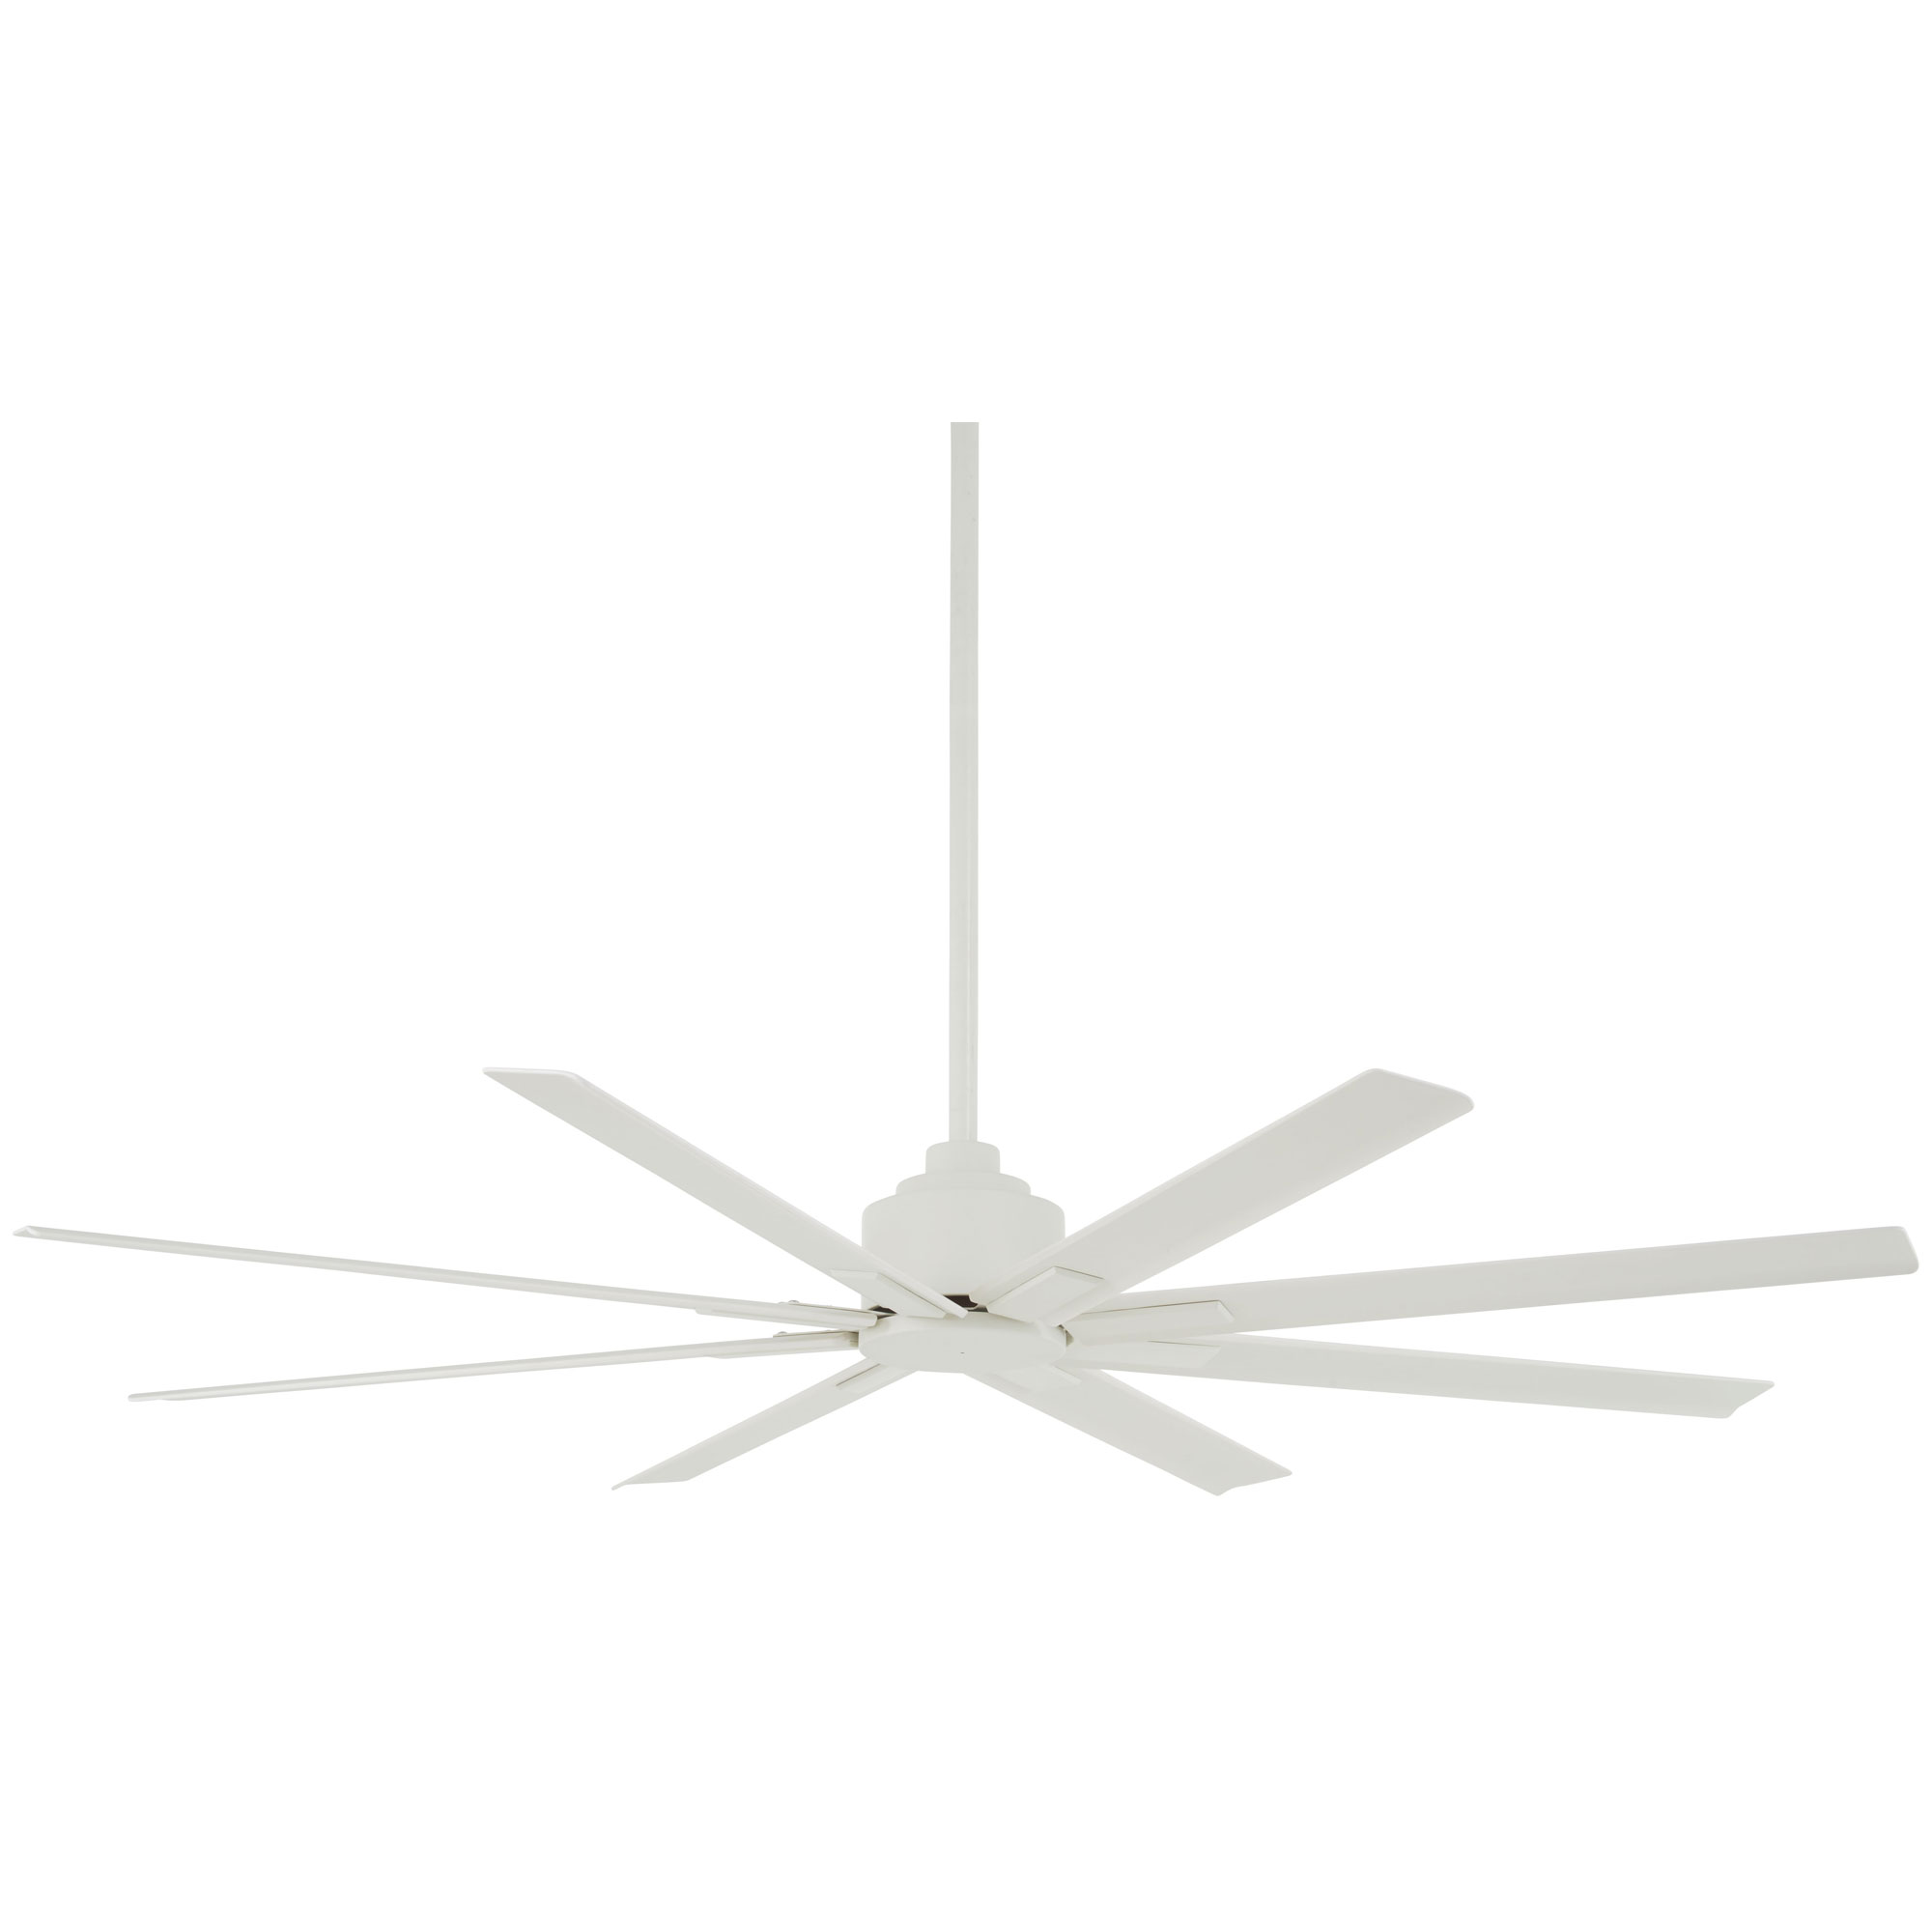 Xtreme H2o 65 Outdoor Ceiling Fan By Minka Aire F896 65 Whf